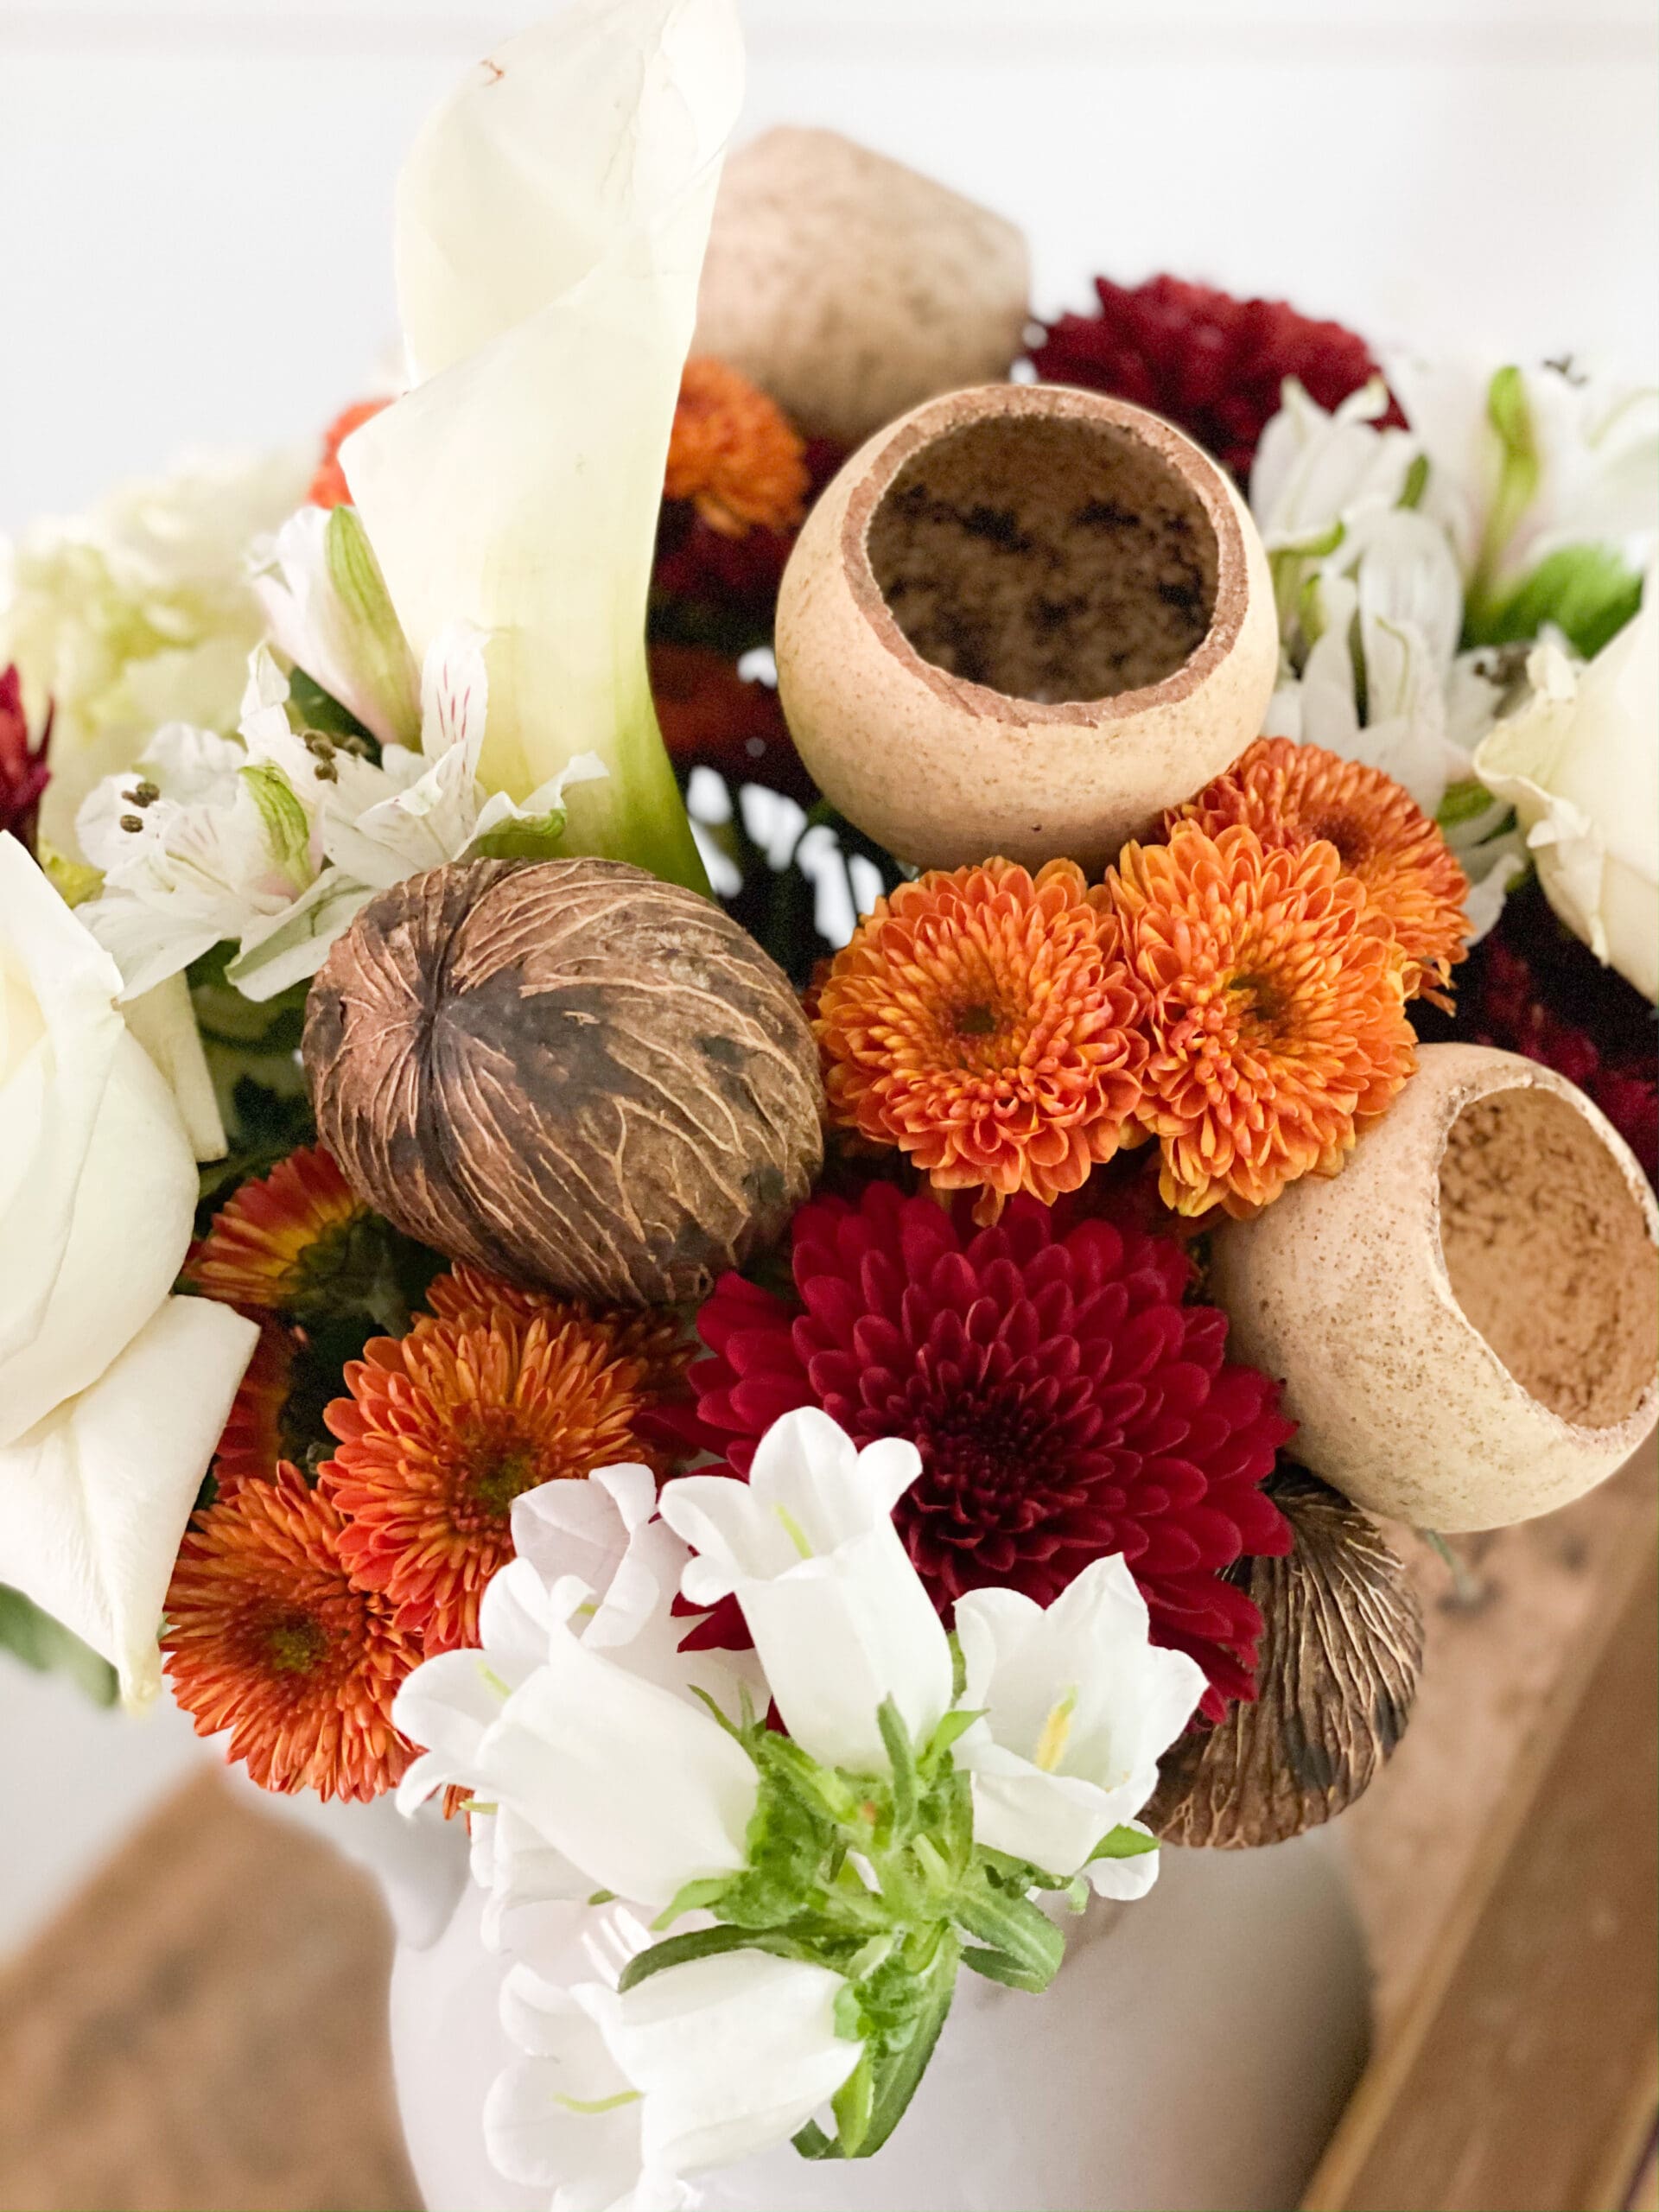 beautiful fall flower arrangement with vibrant red, orange, and white flowers and acorns